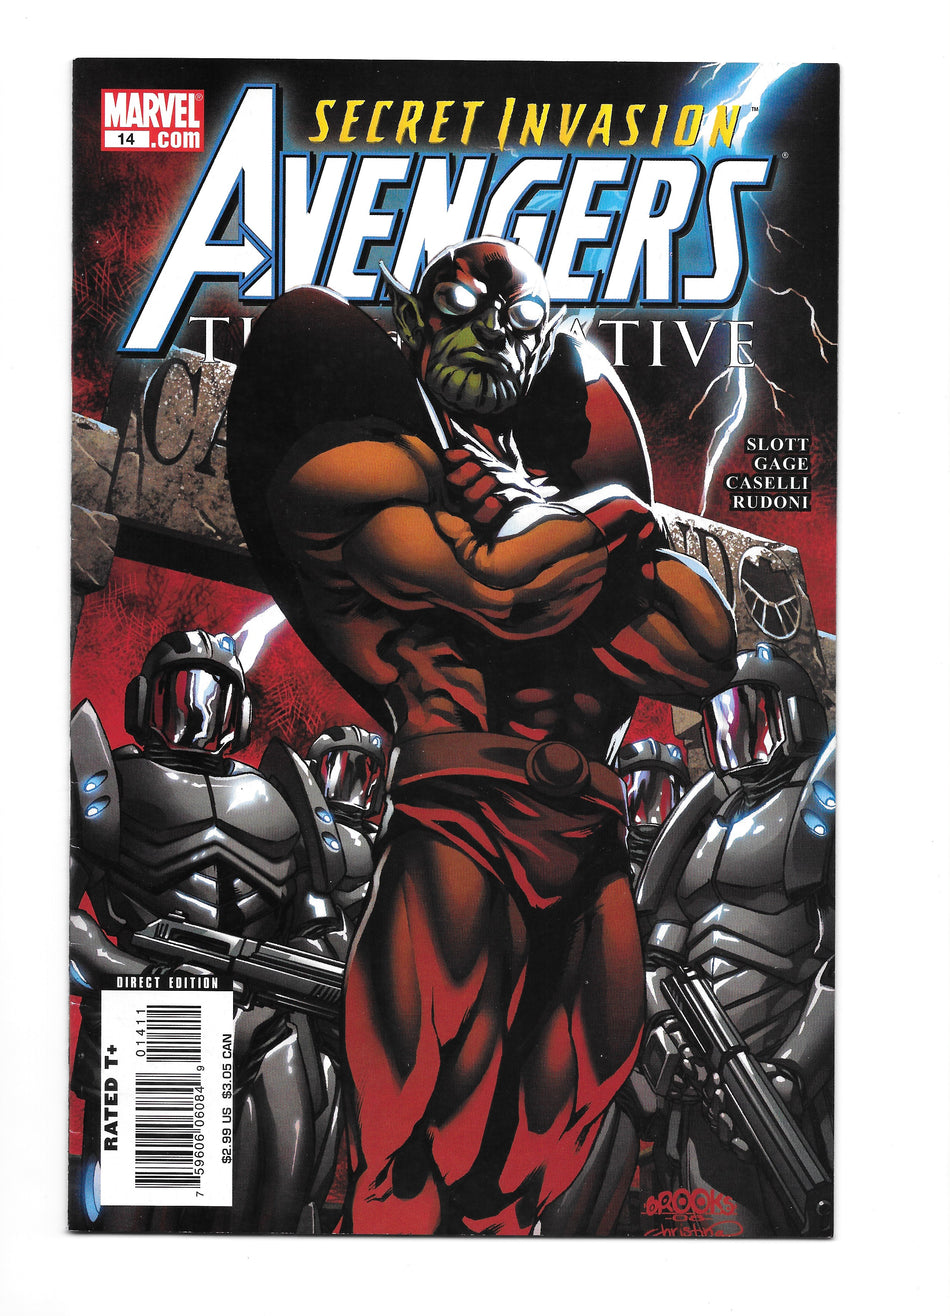 Photo of Avengers Initiative Issue 14 Si comic sold by Stronghold Collectibles